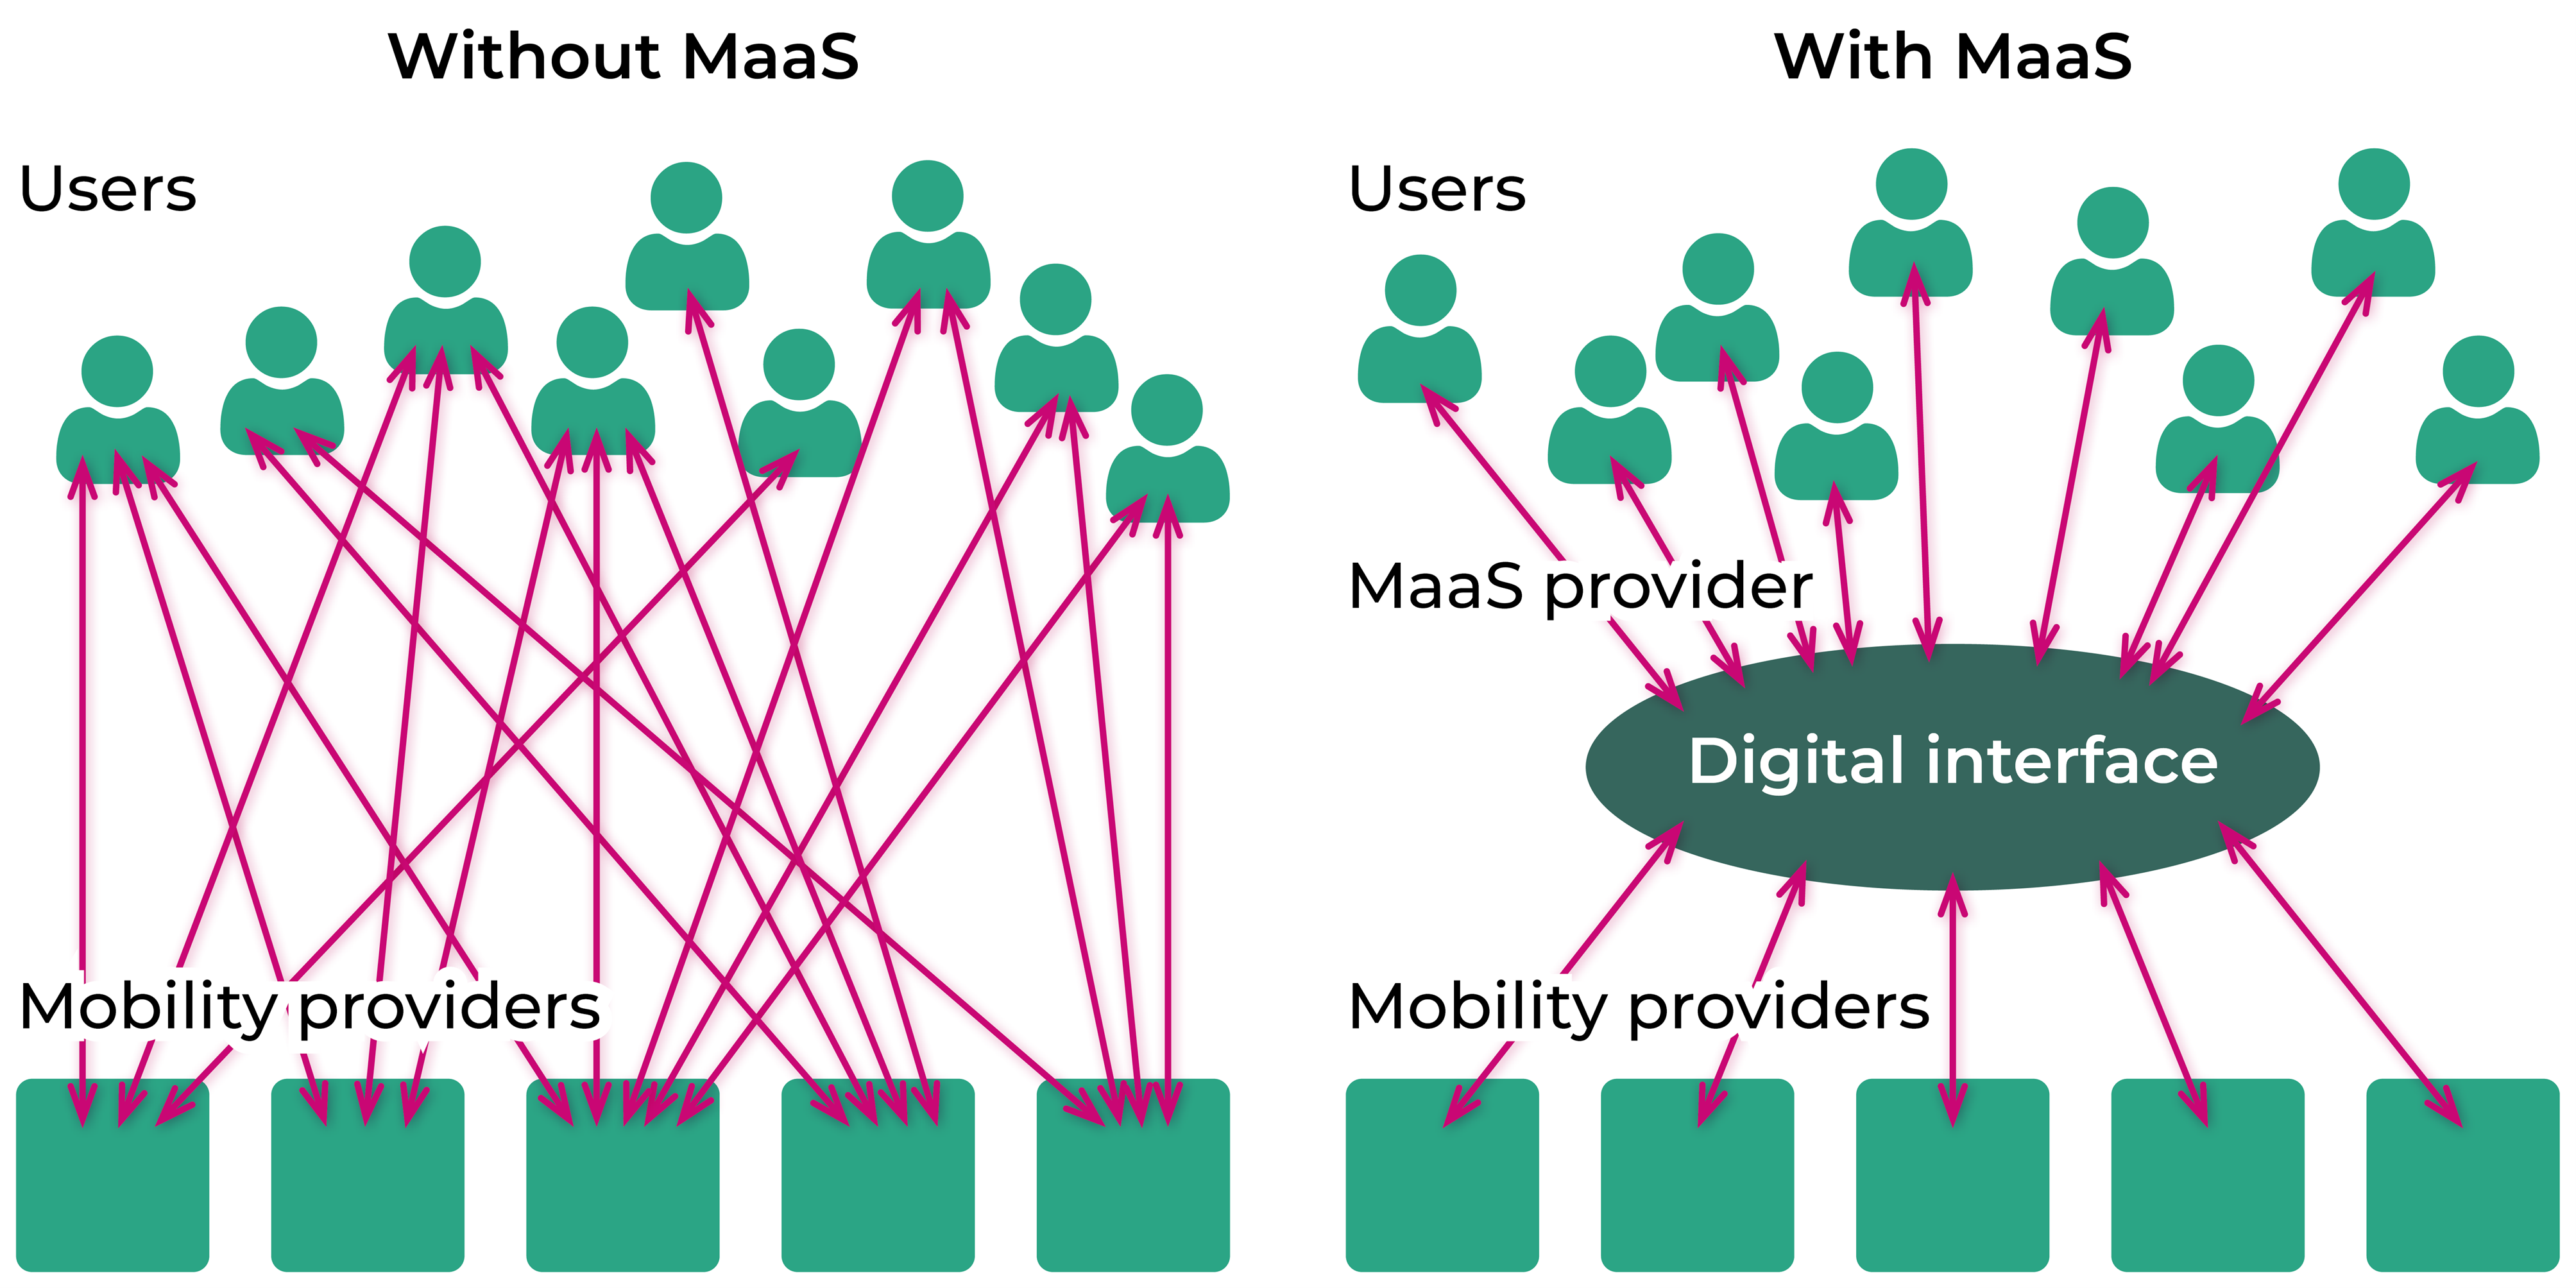 Diagram showing enhanced connection between users and mobility providers through the Mobility as a Service interface.